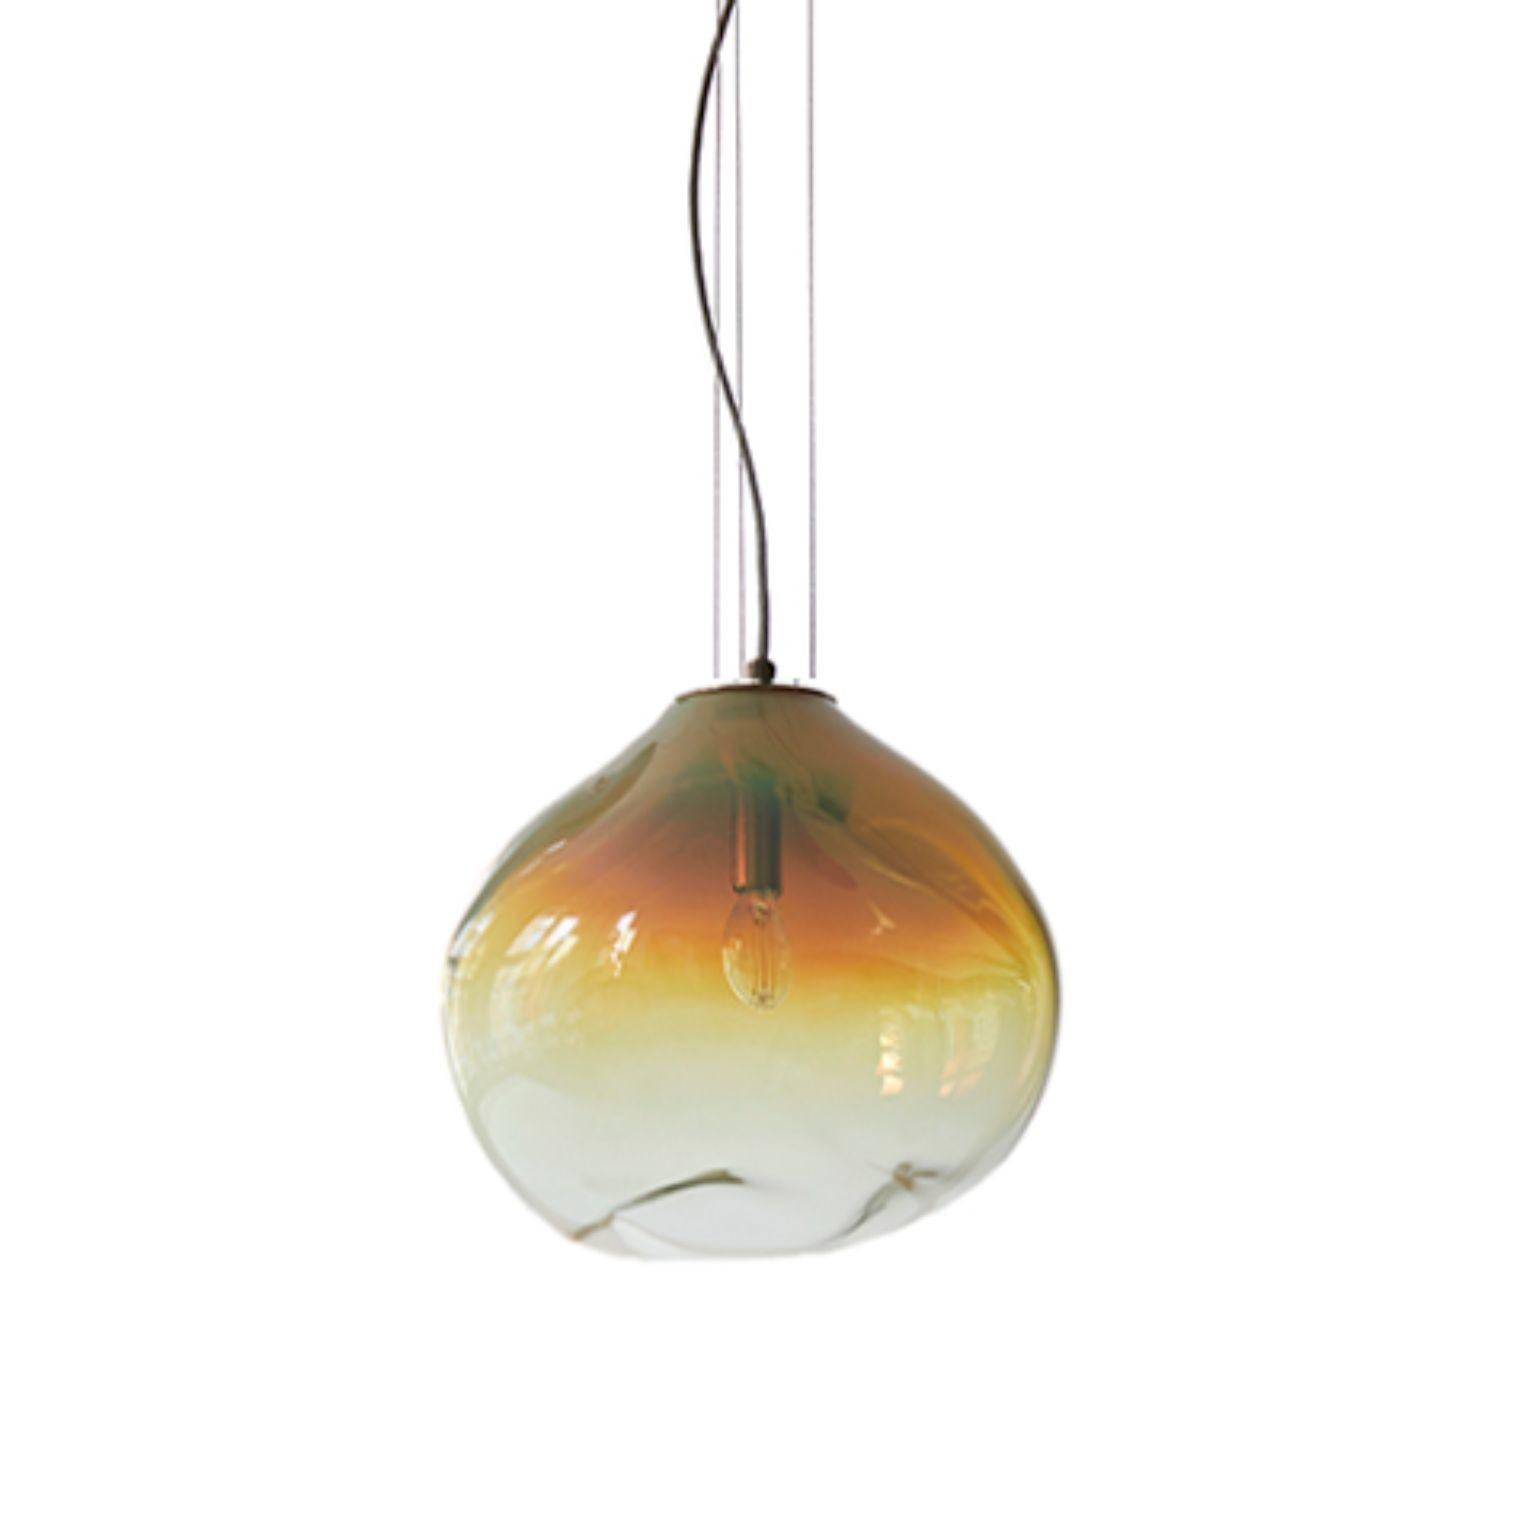 Set of 2 Haumea Amorph Amber Iridescent L Pendants by Eloa In New Condition For Sale In Geneve, CH